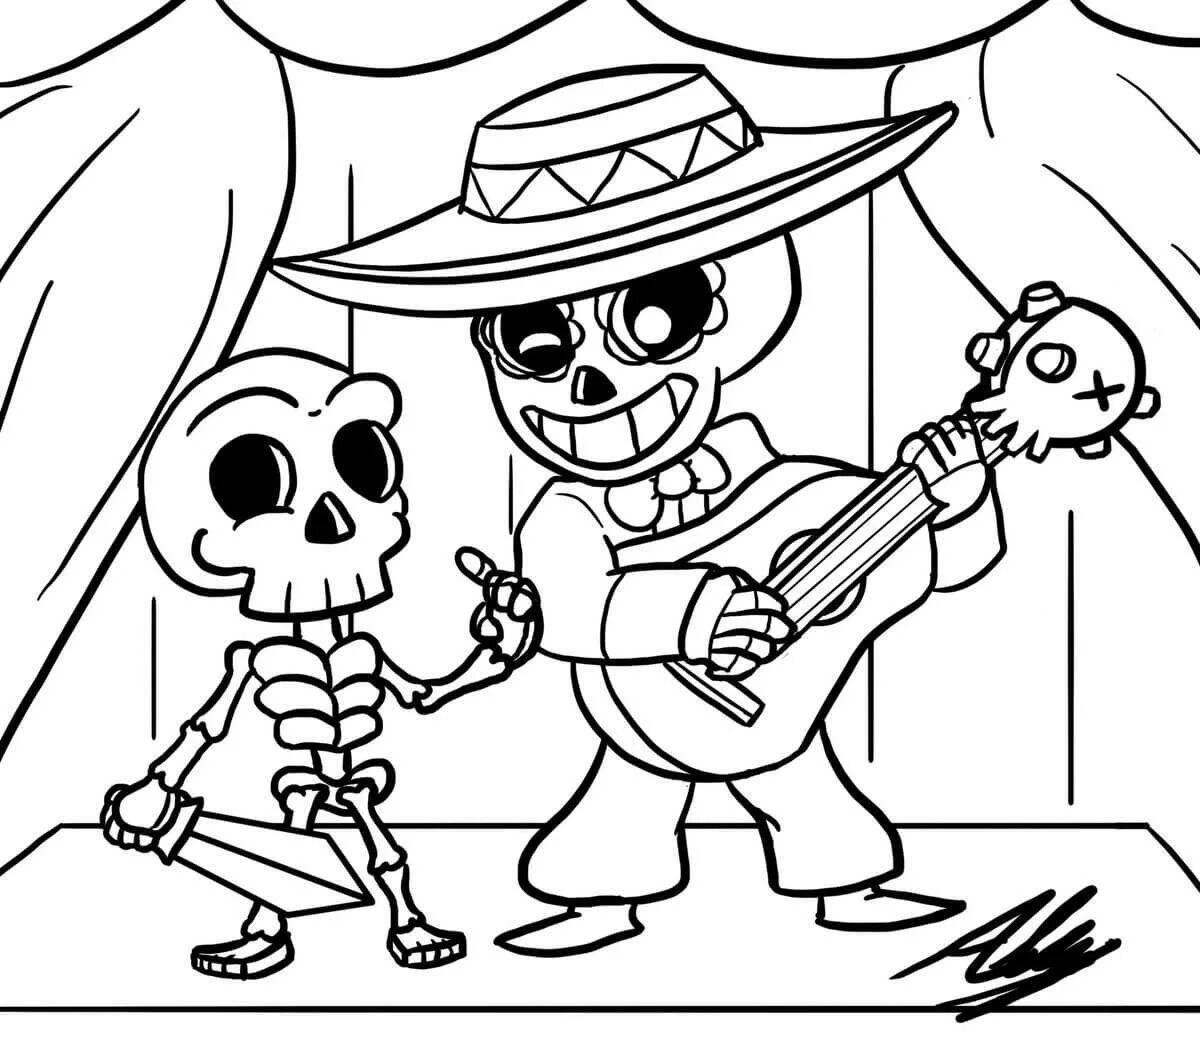 Poco's gorgeous coloring book from bravo stars